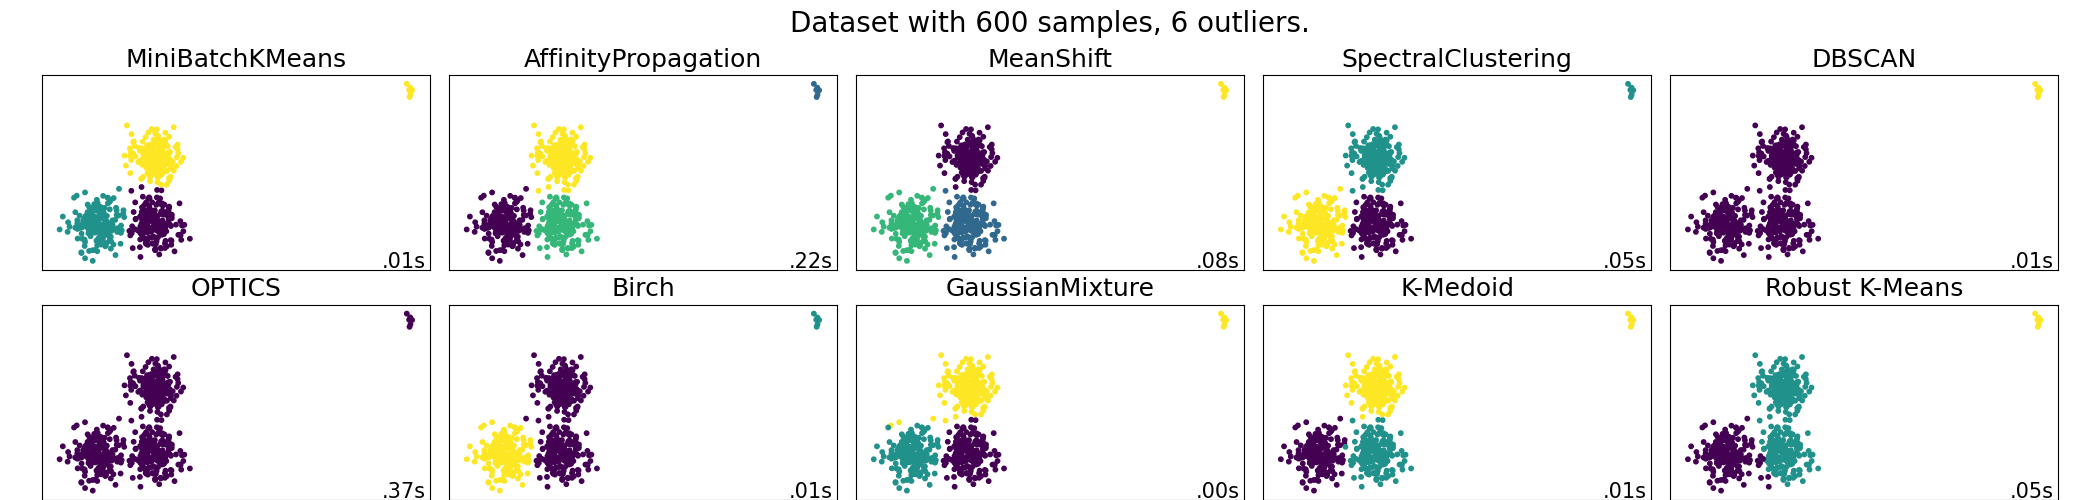 Dataset with 600 samples, 6 outliers., MiniBatchKMeans, AffinityPropagation, MeanShift, SpectralClustering, DBSCAN, OPTICS, Birch, GaussianMixture, K-Medoid, Robust K-Means